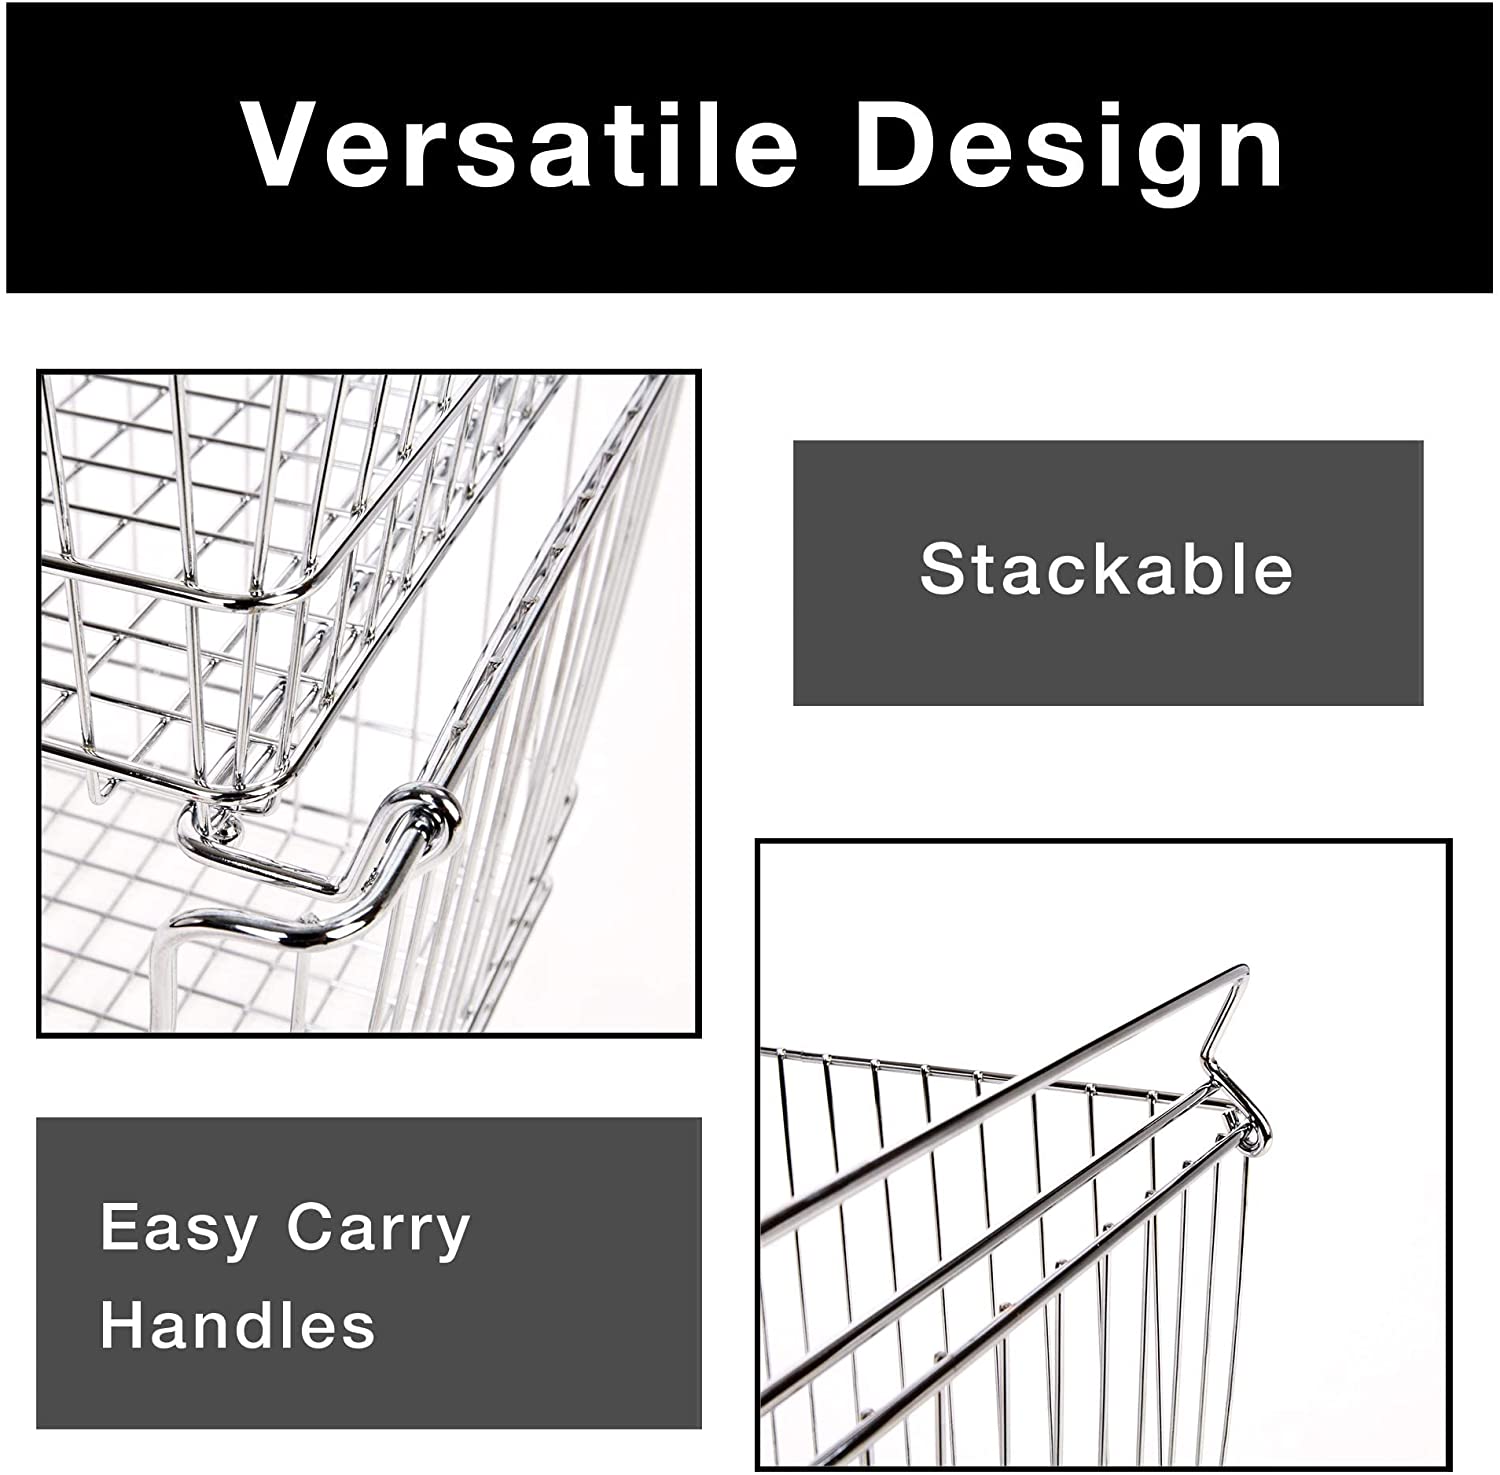 Large Metal Wire Stacking Baskets with Handles - Smart Design® 11